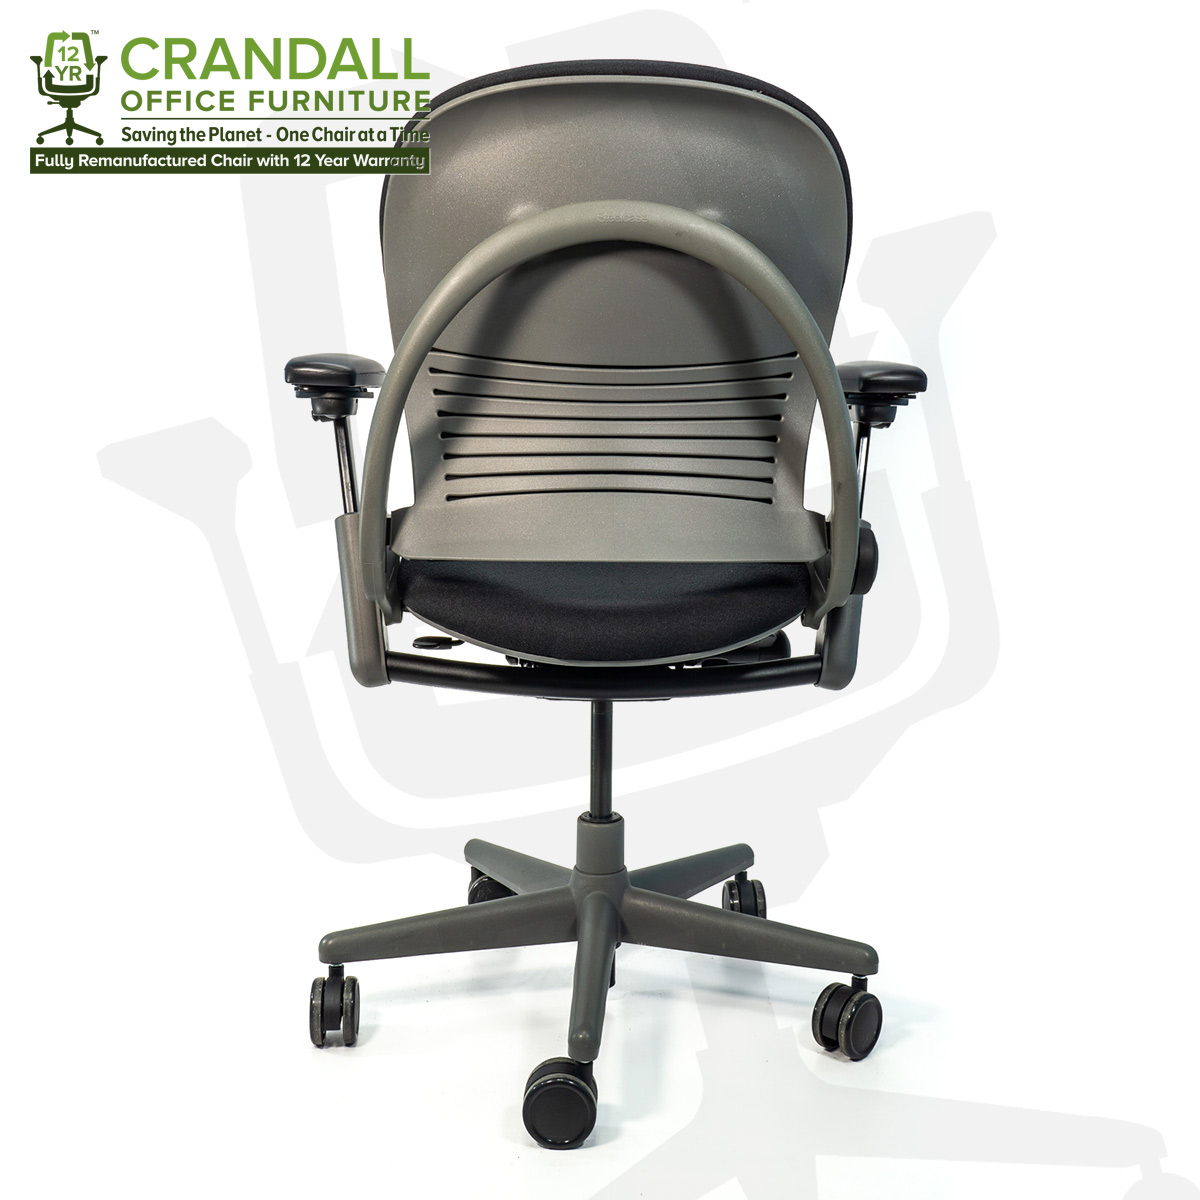 Crandall Office Furniture Remanufactured Steelcase 462 Leap V1 Office Chair Sterling Frame with 12 Year Warranty 0005